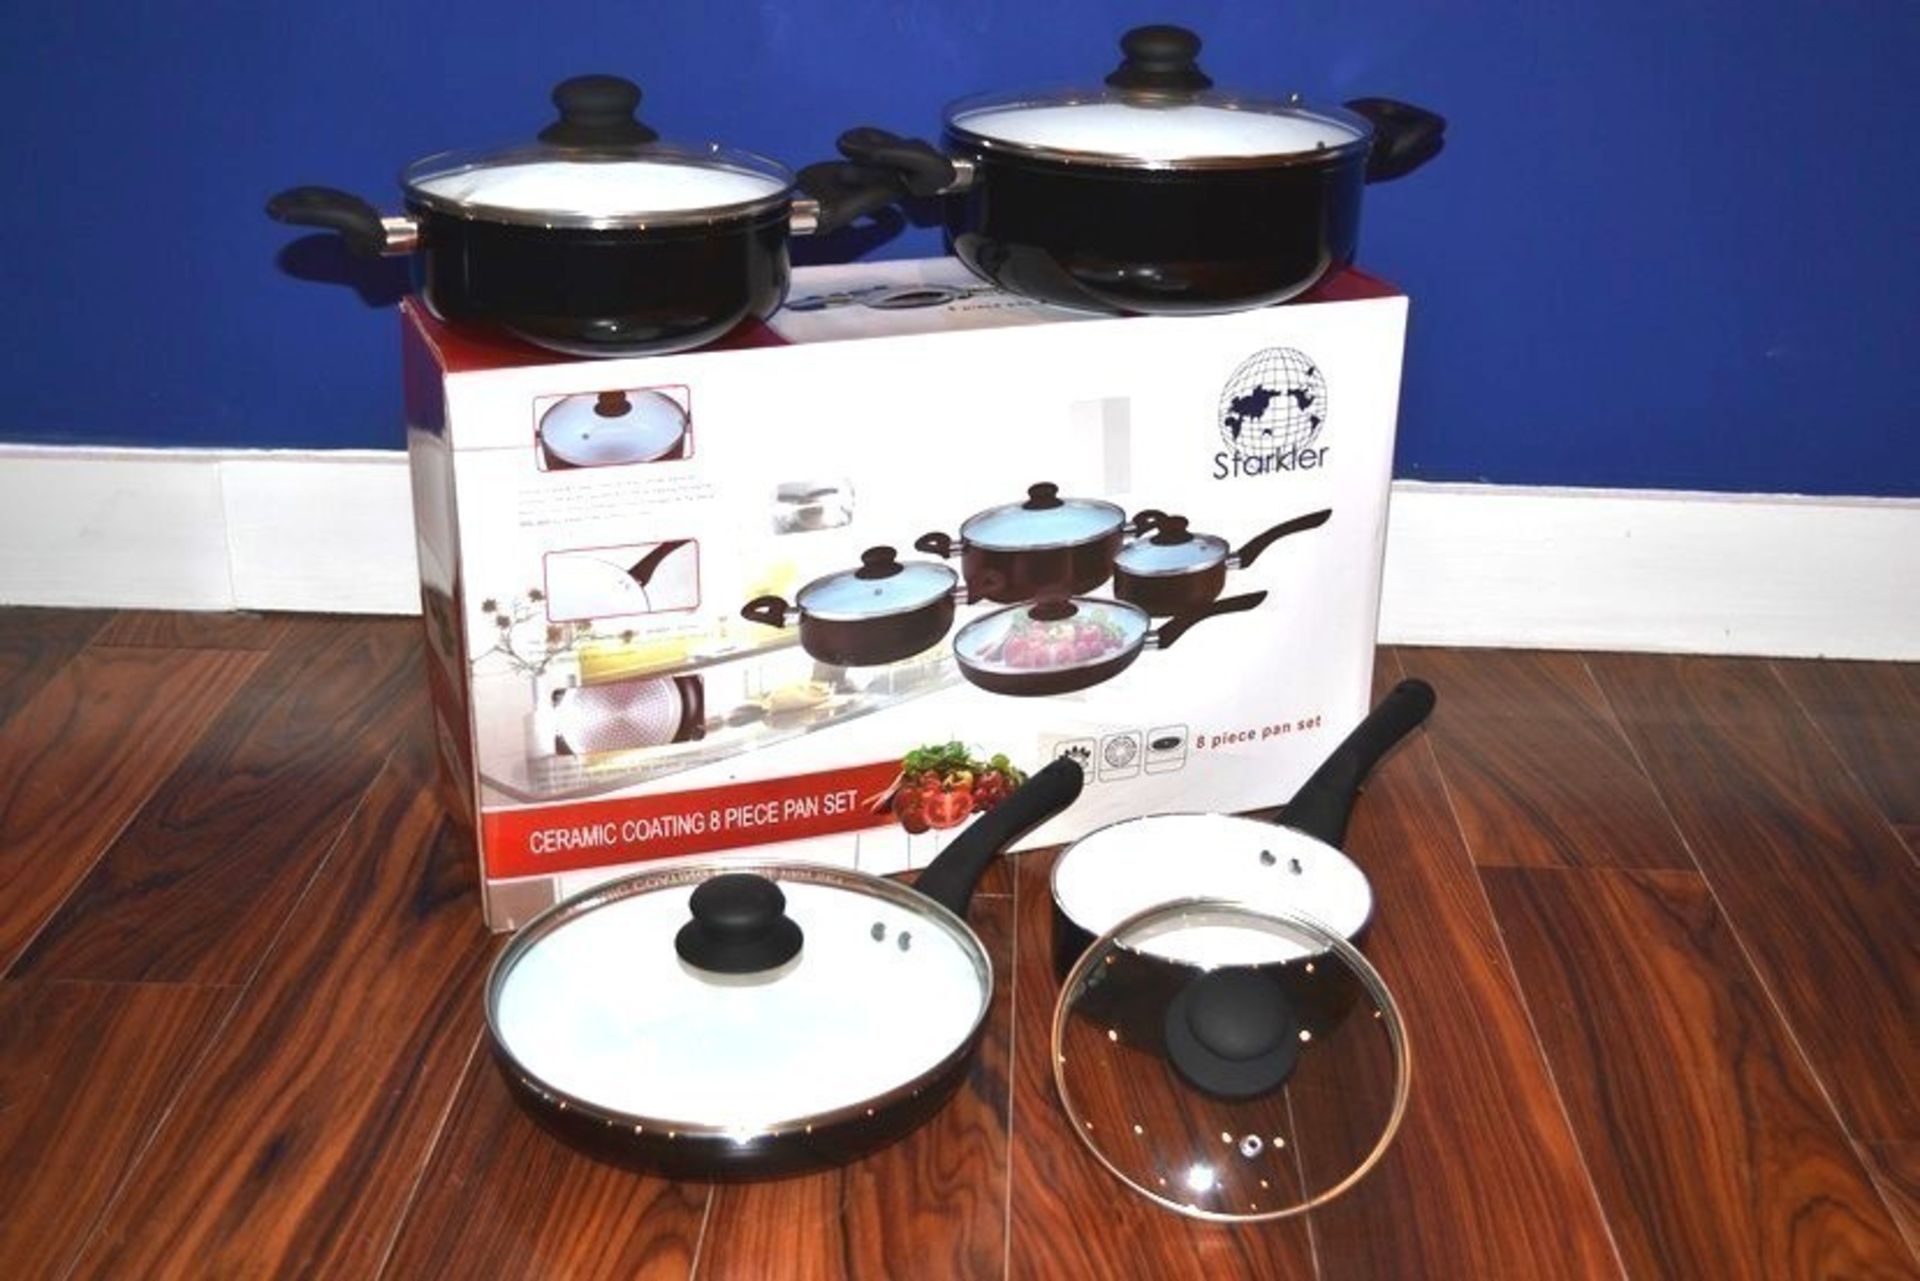 1 x BOXED BRAND NEW STARKLER 8 PIECE CERAMIC COATED PAN SET  *PLEASE NOTE THAT THE BID PRICE IS